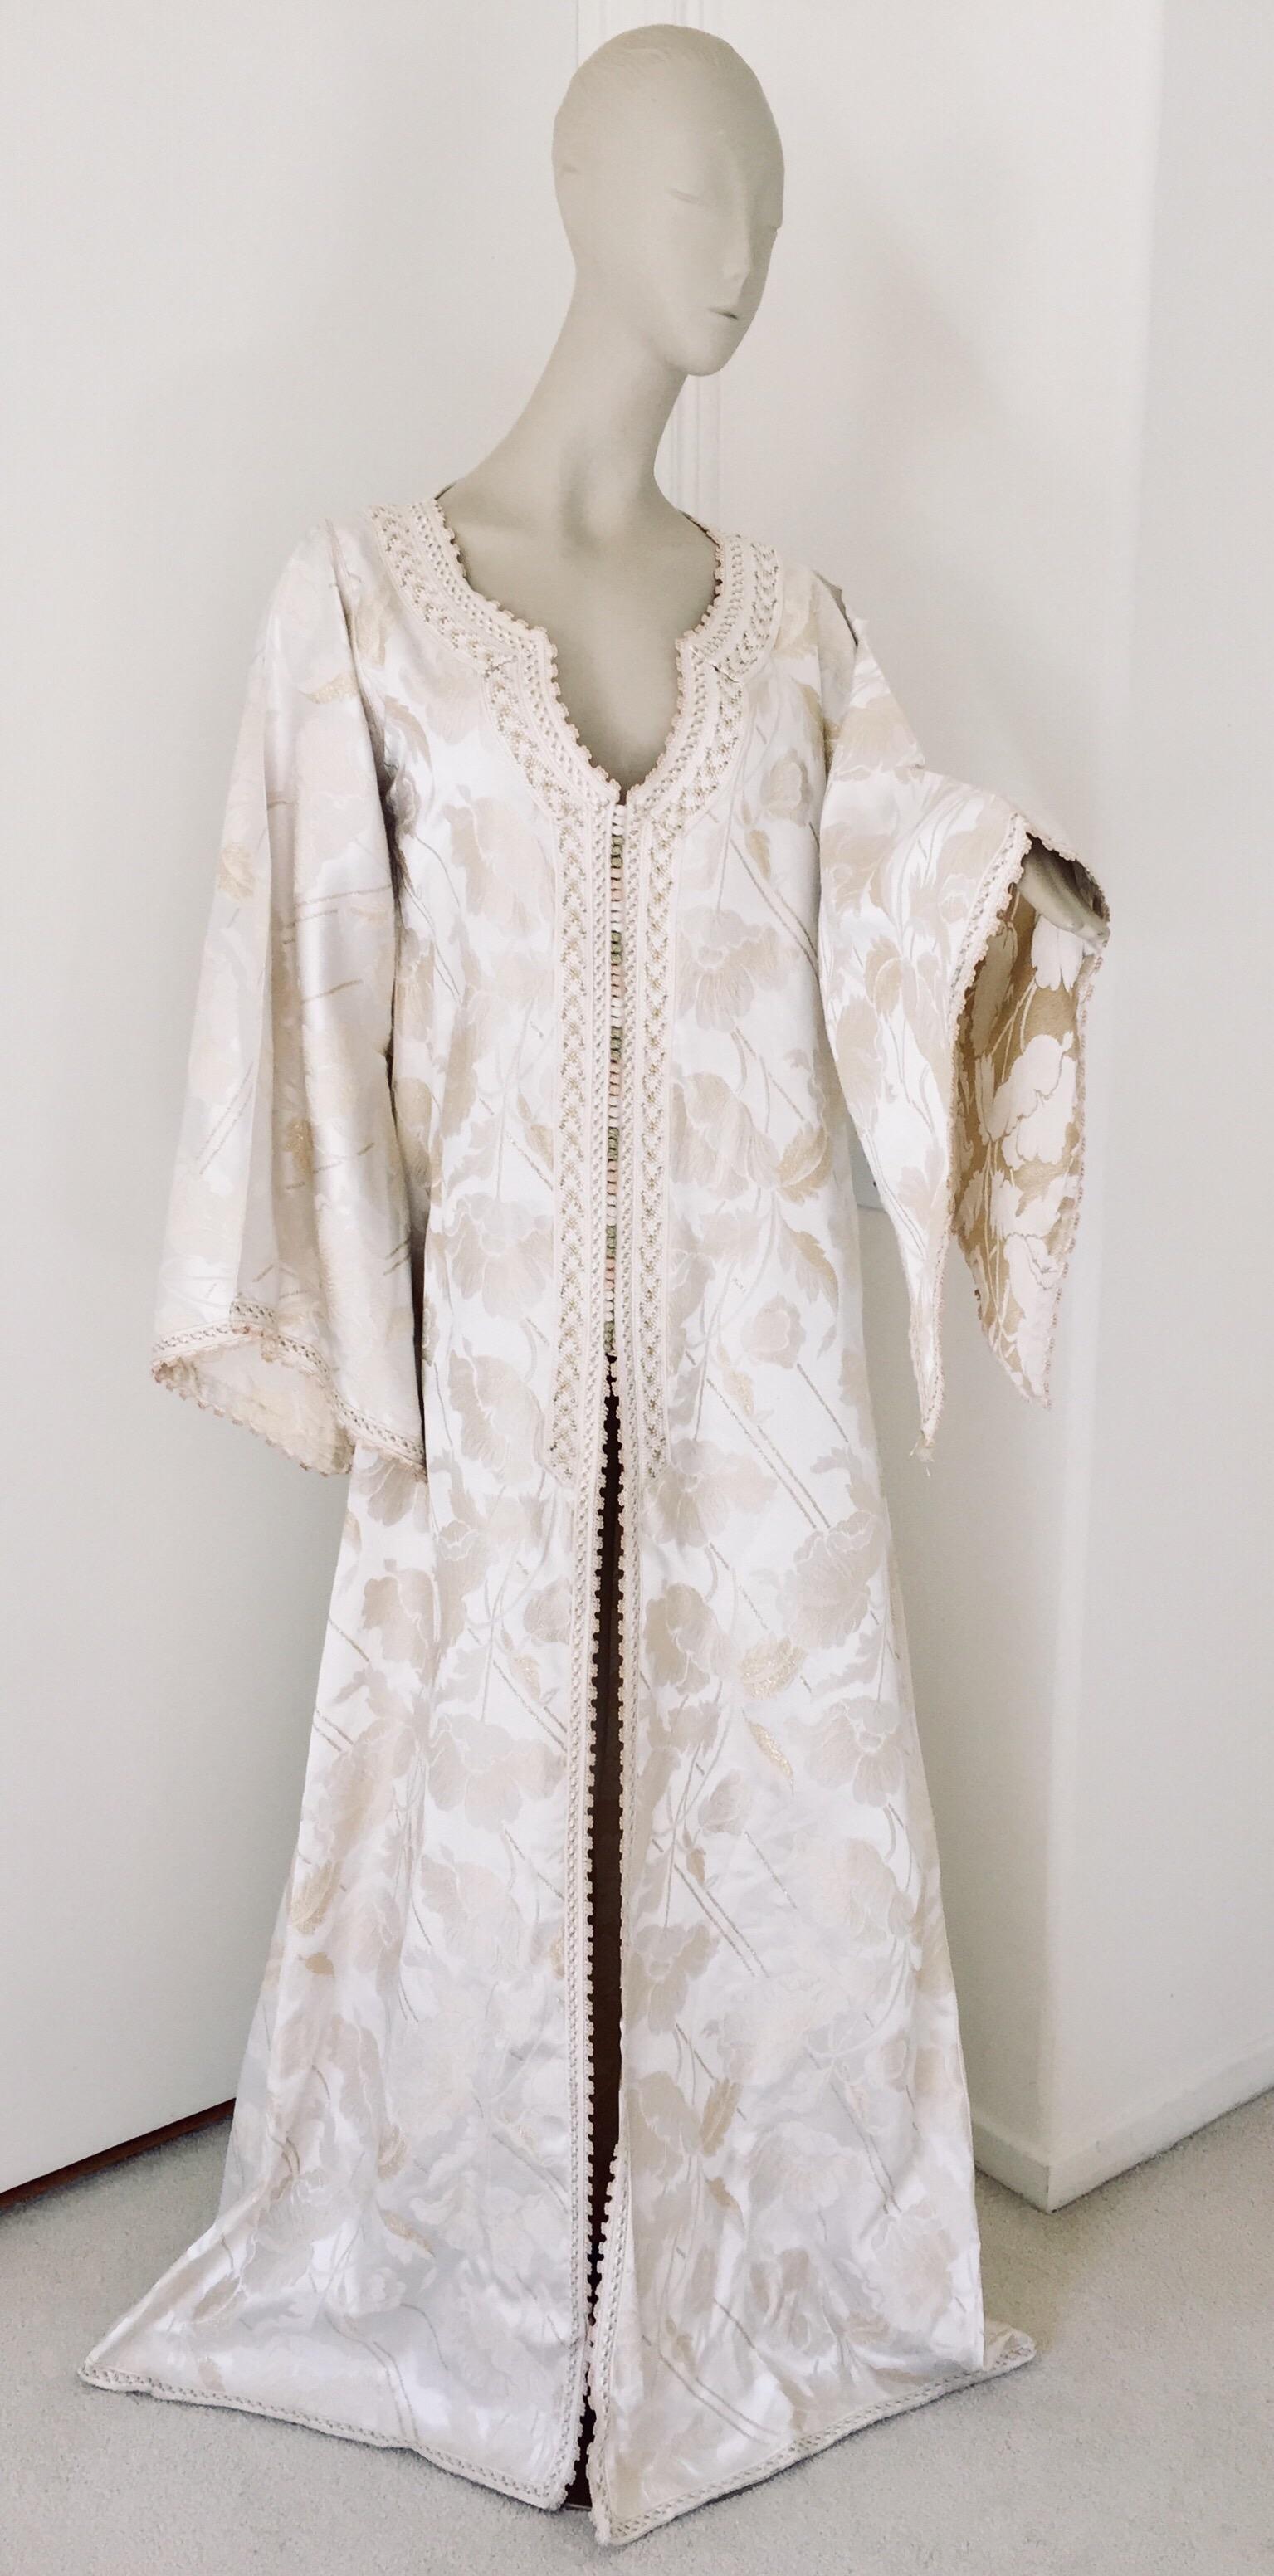 Elegant Moroccan white ivory and old brocade kaftan embroidered with gold trim threads.
Size L to XL circa 1980s.
This long maxi dress kaftan is embroidered and embellished entirely by hand.
One of a kind evening Moroccan Middle Eastern gown.
The